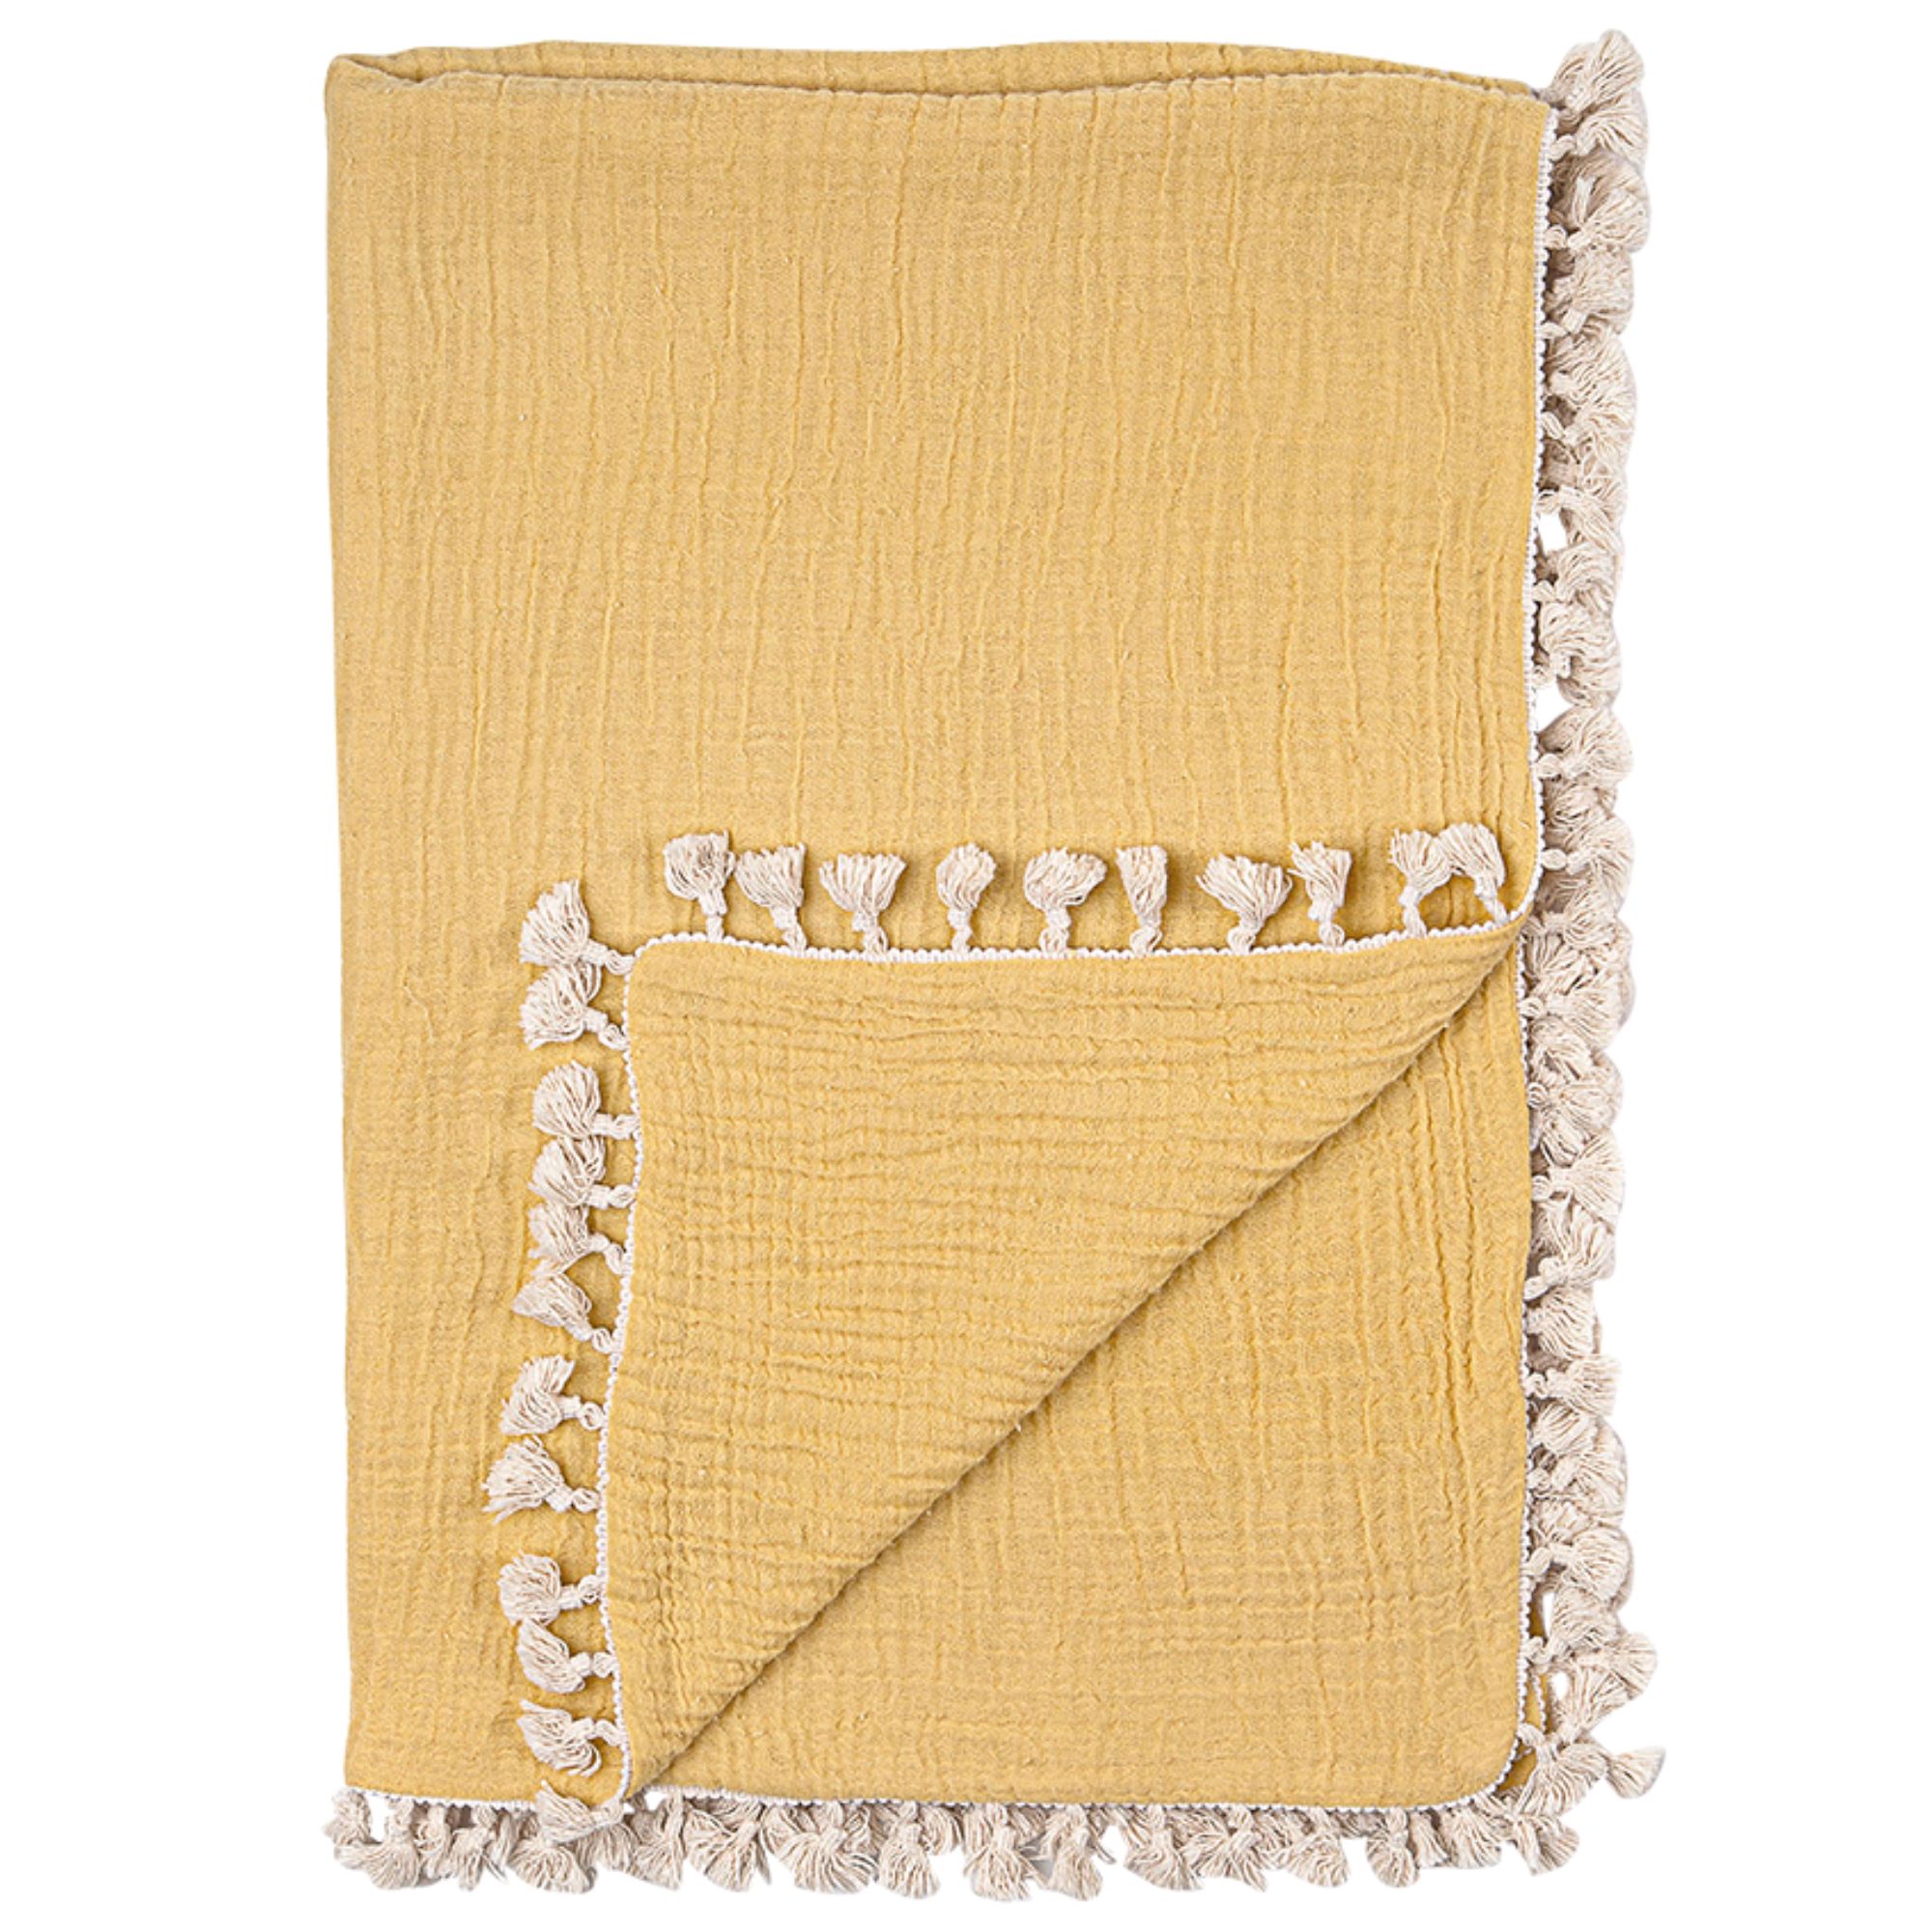 Yellow muslin blanket on white background